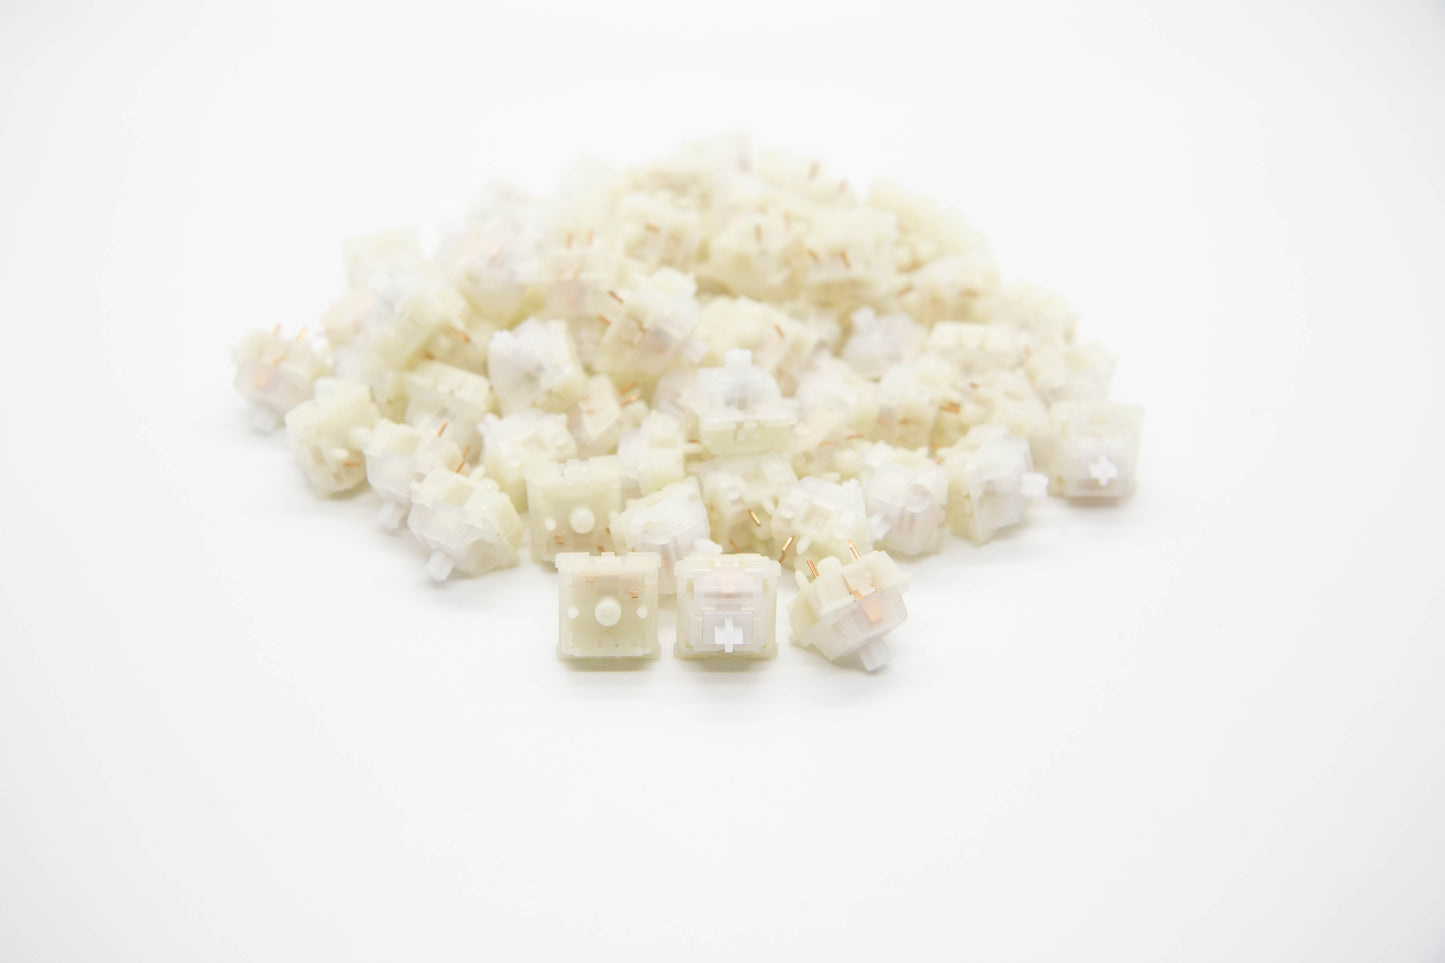 Close-up shot of a pile of Gateron Milky Clear mechanical keyboard switches featuring white housing and clear stems